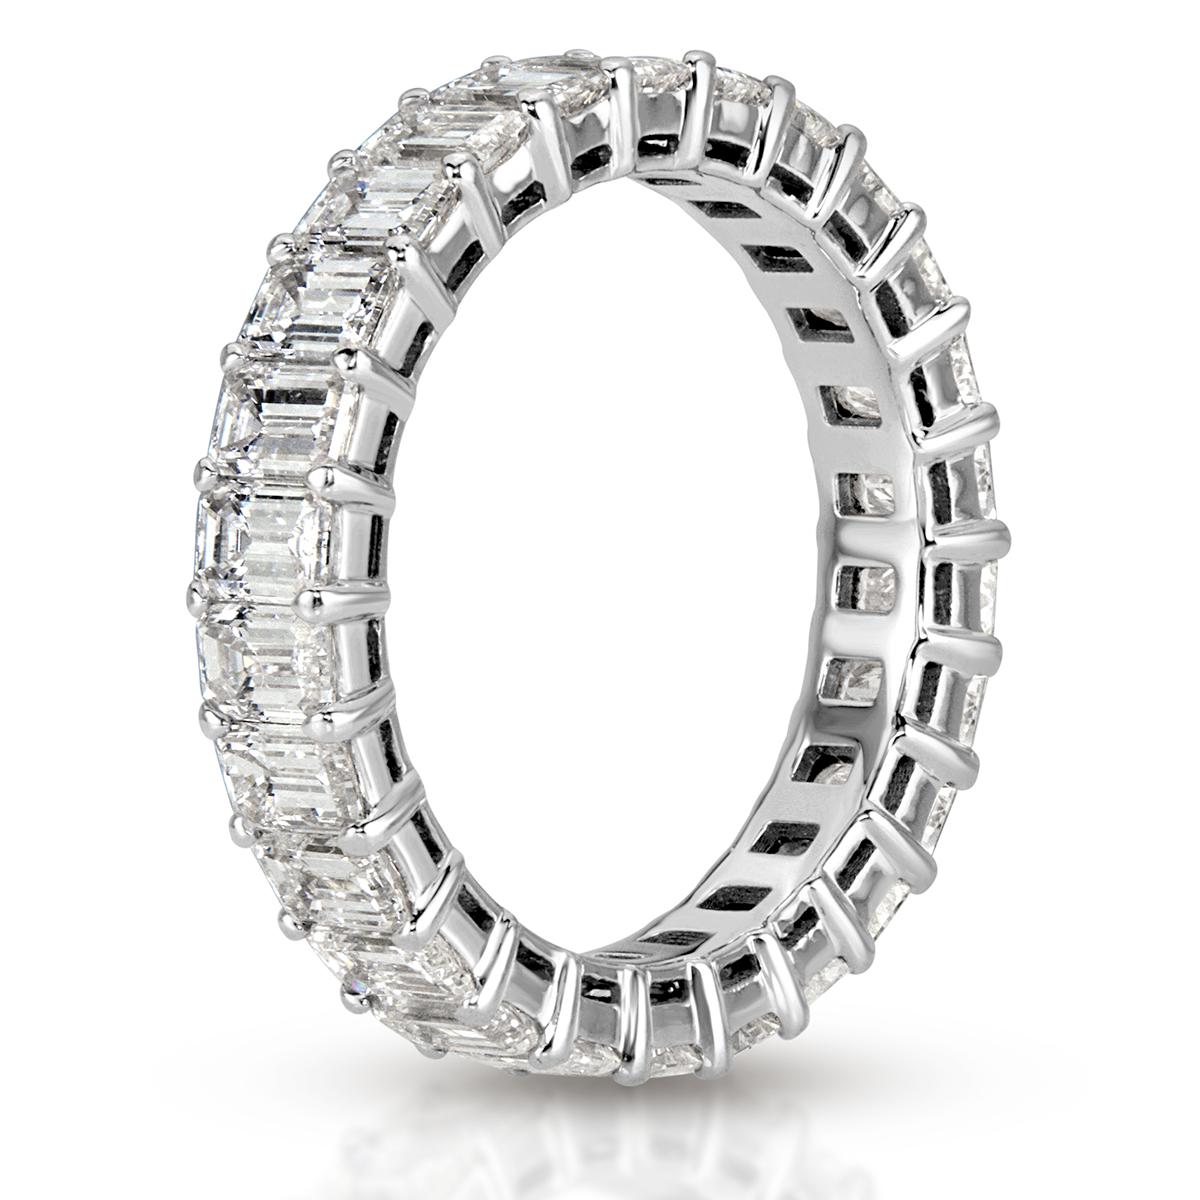 This elegant diamond eternity band showcases 4.00ct of perfectly matched emerald cut diamonds graded at F-G in color, VS1-VS2 in clarity . The diamonds are hand set in a classic 18k white gold, basket setting style. All eternity bands are shown in a